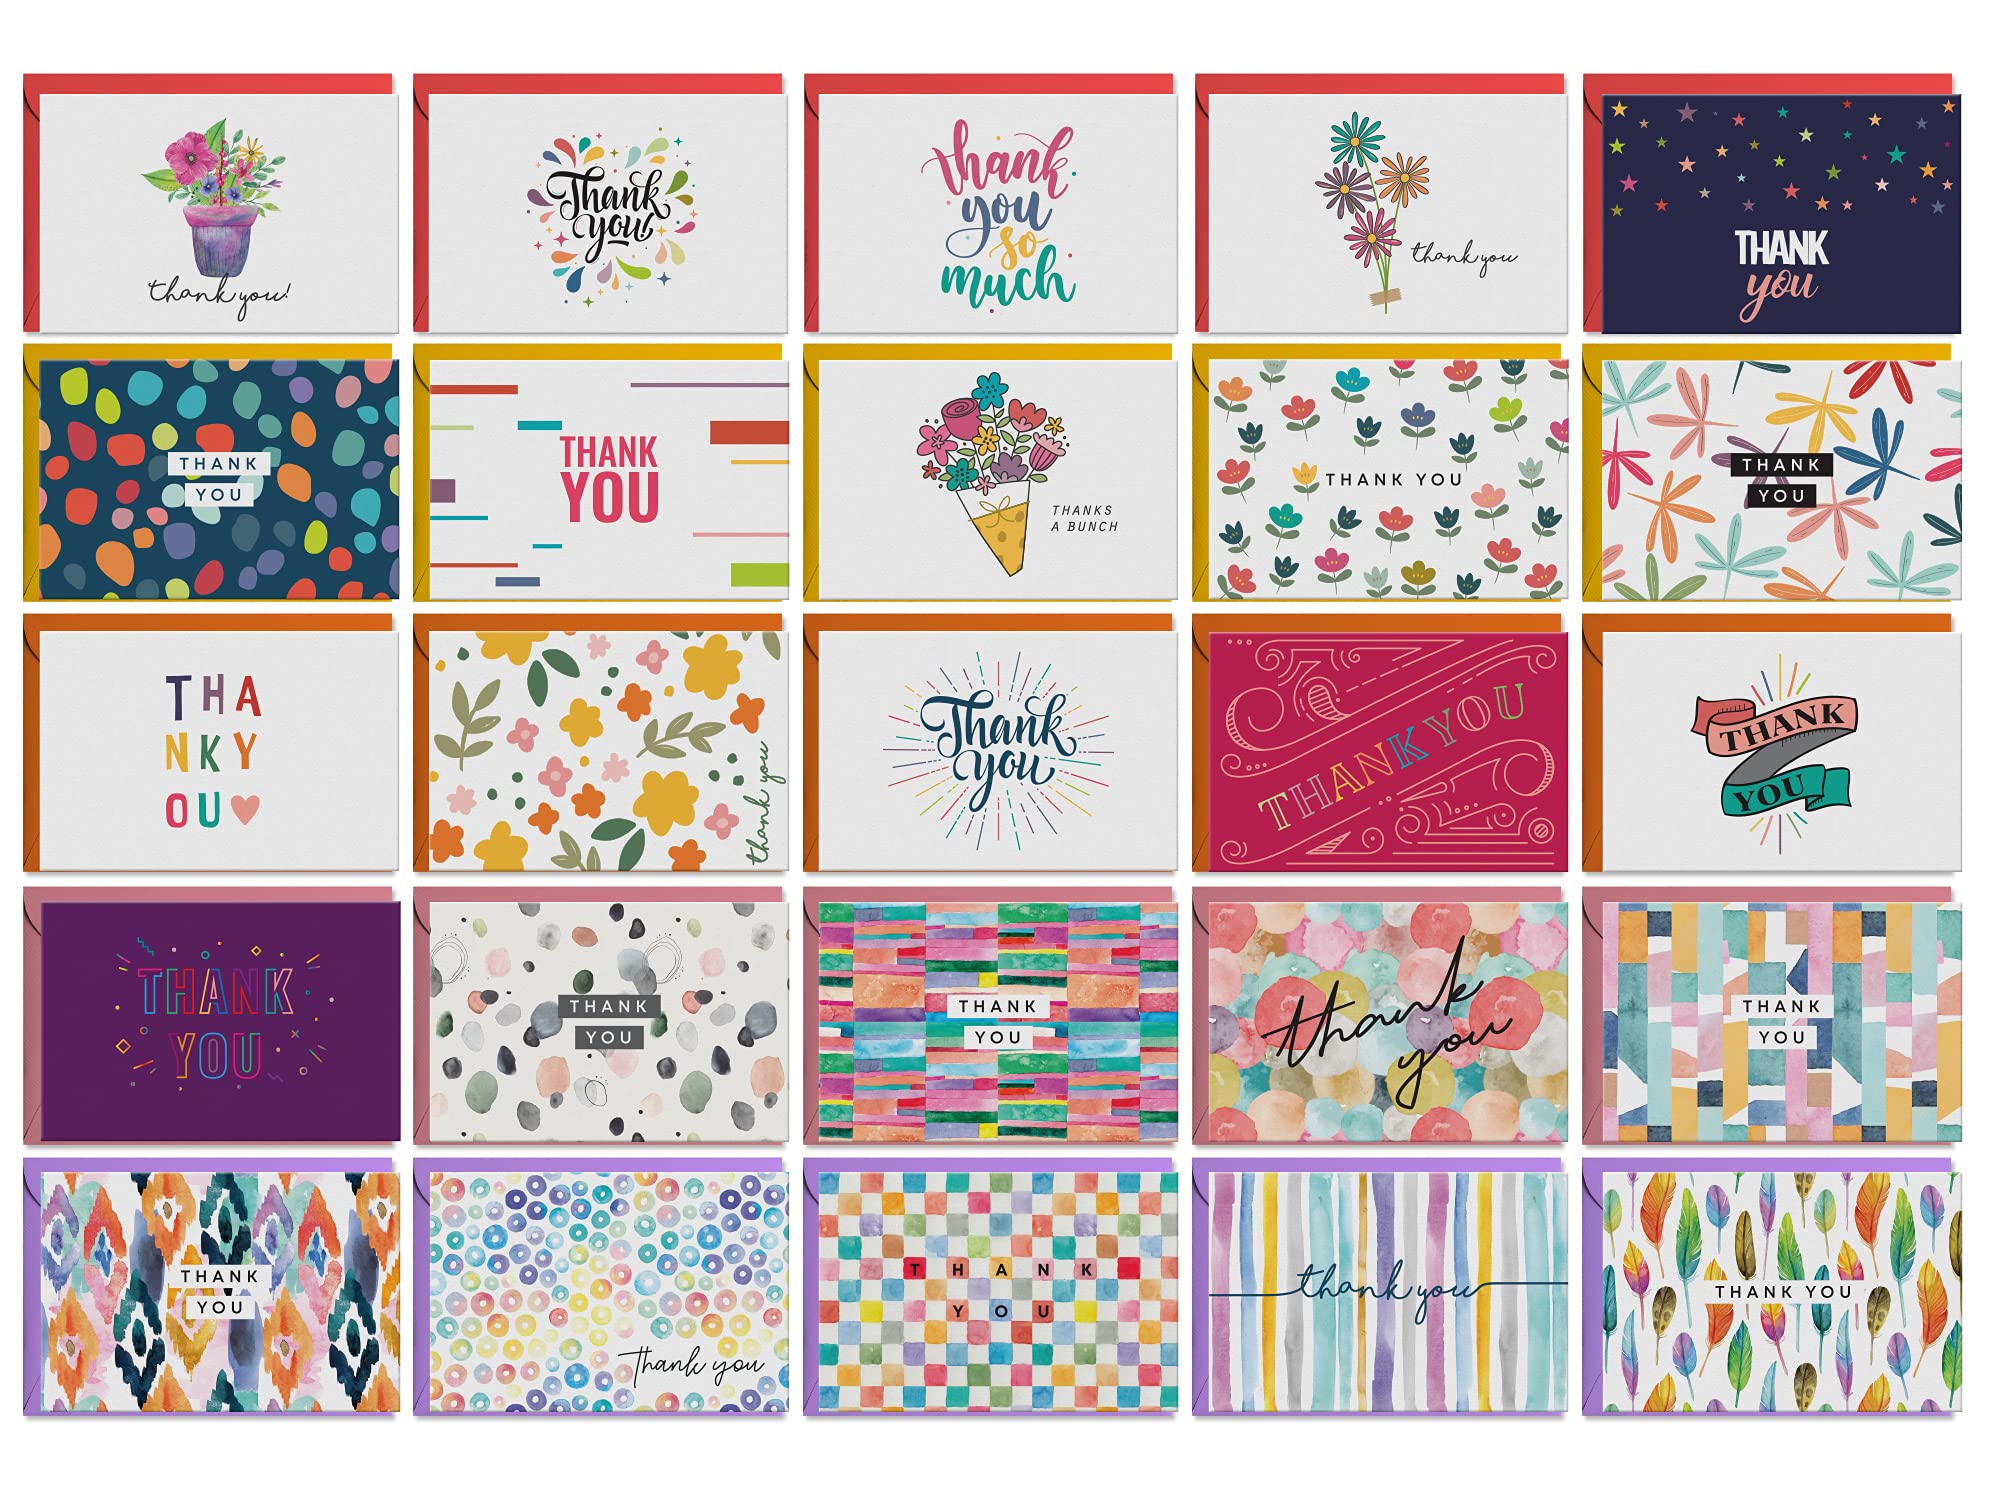 Dessie 100 Unique Thank You Cards Bulk - Blank Note Cards with 100 Different, Colorful Designs, No repetition. Colorful Envelopes, Gold Seals and Sturdy Storage Box.